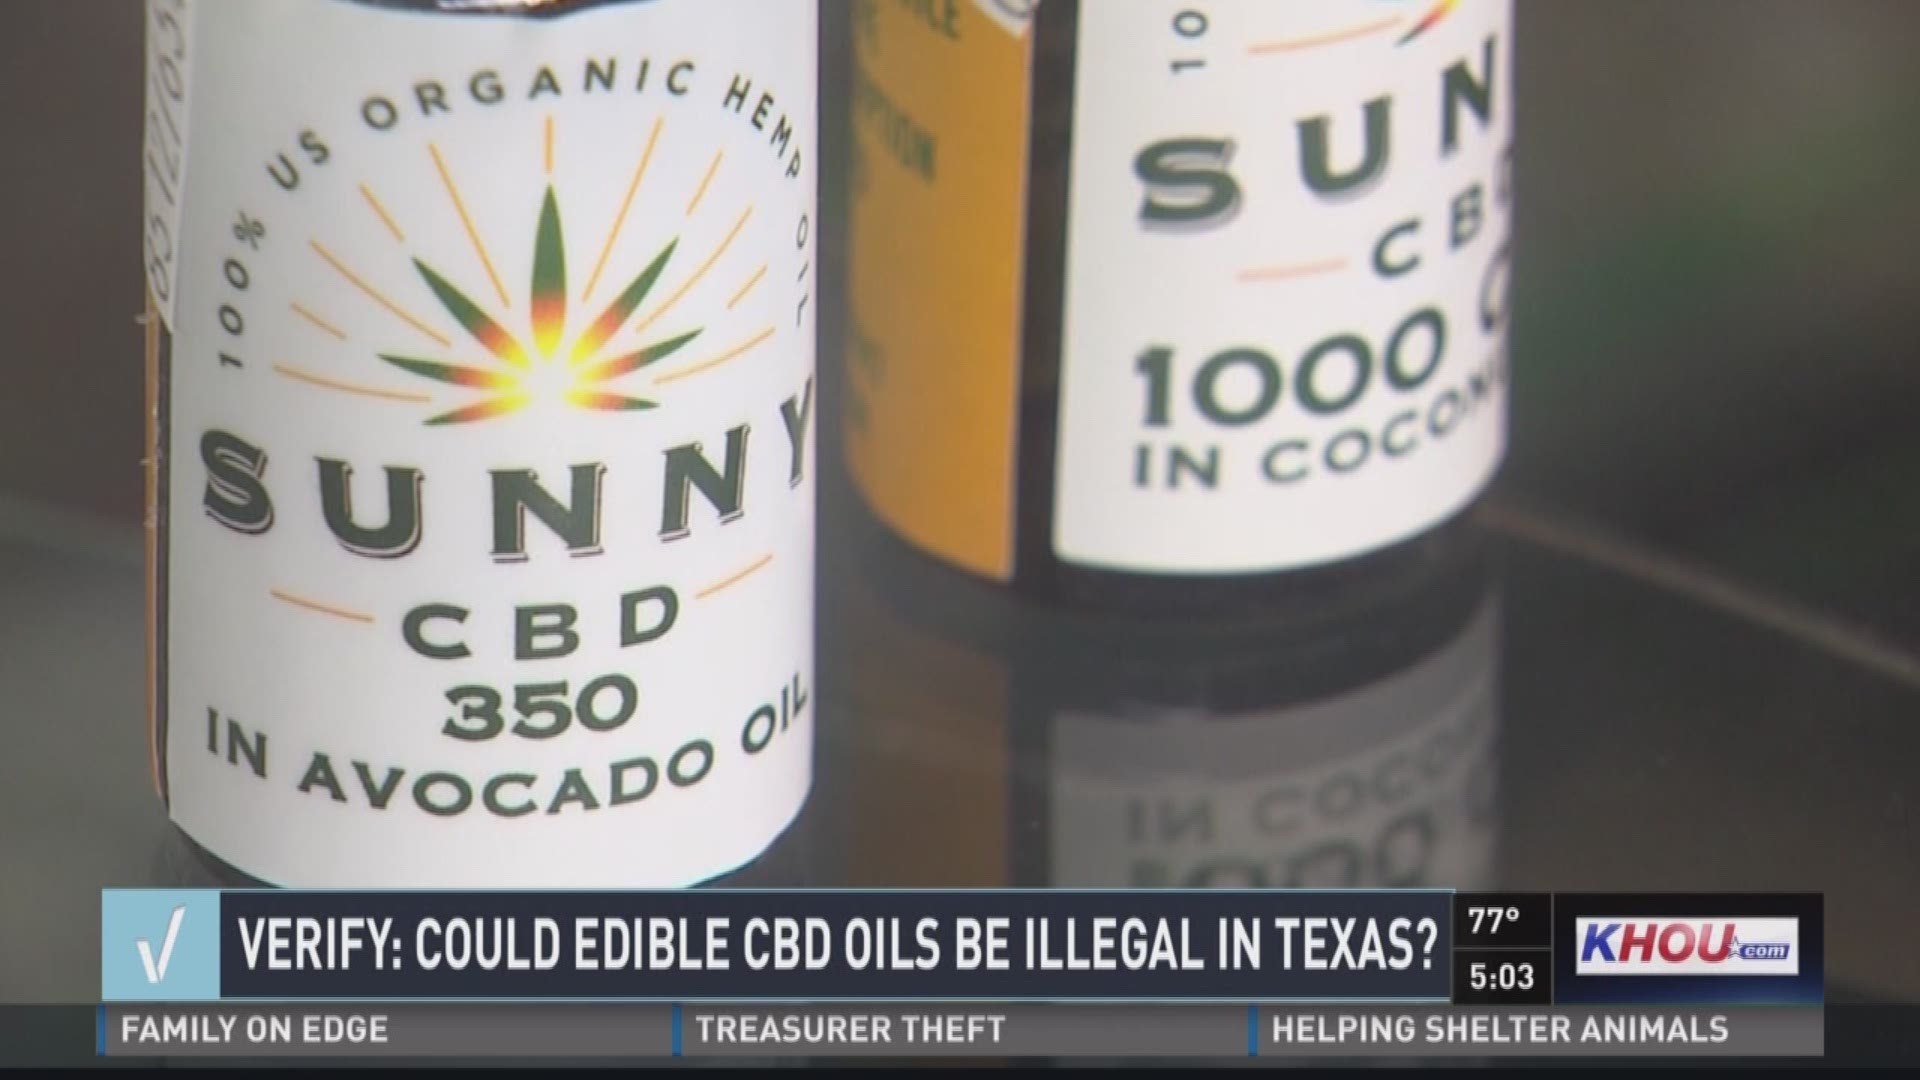 Cannabis Advocacy Groups are claiming the state will soon go in and seize all hemp cannabidiol food products, making them illegal to sell in Texas. We wanted to verify if that can actually happen.